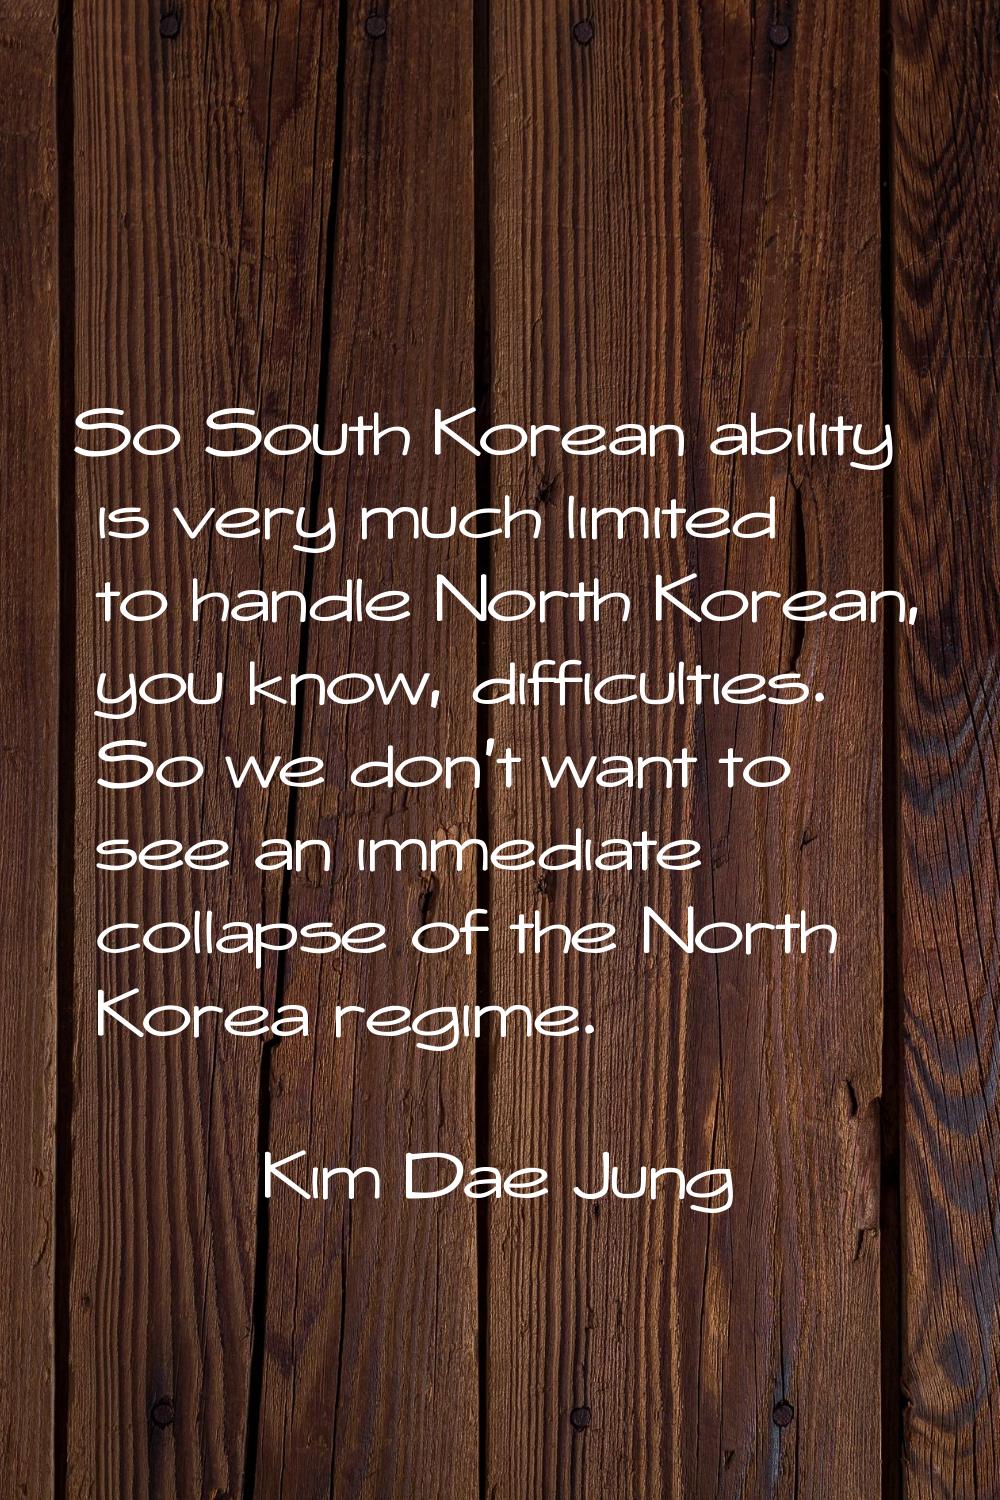 So South Korean ability is very much limited to handle North Korean, you know, difficulties. So we 